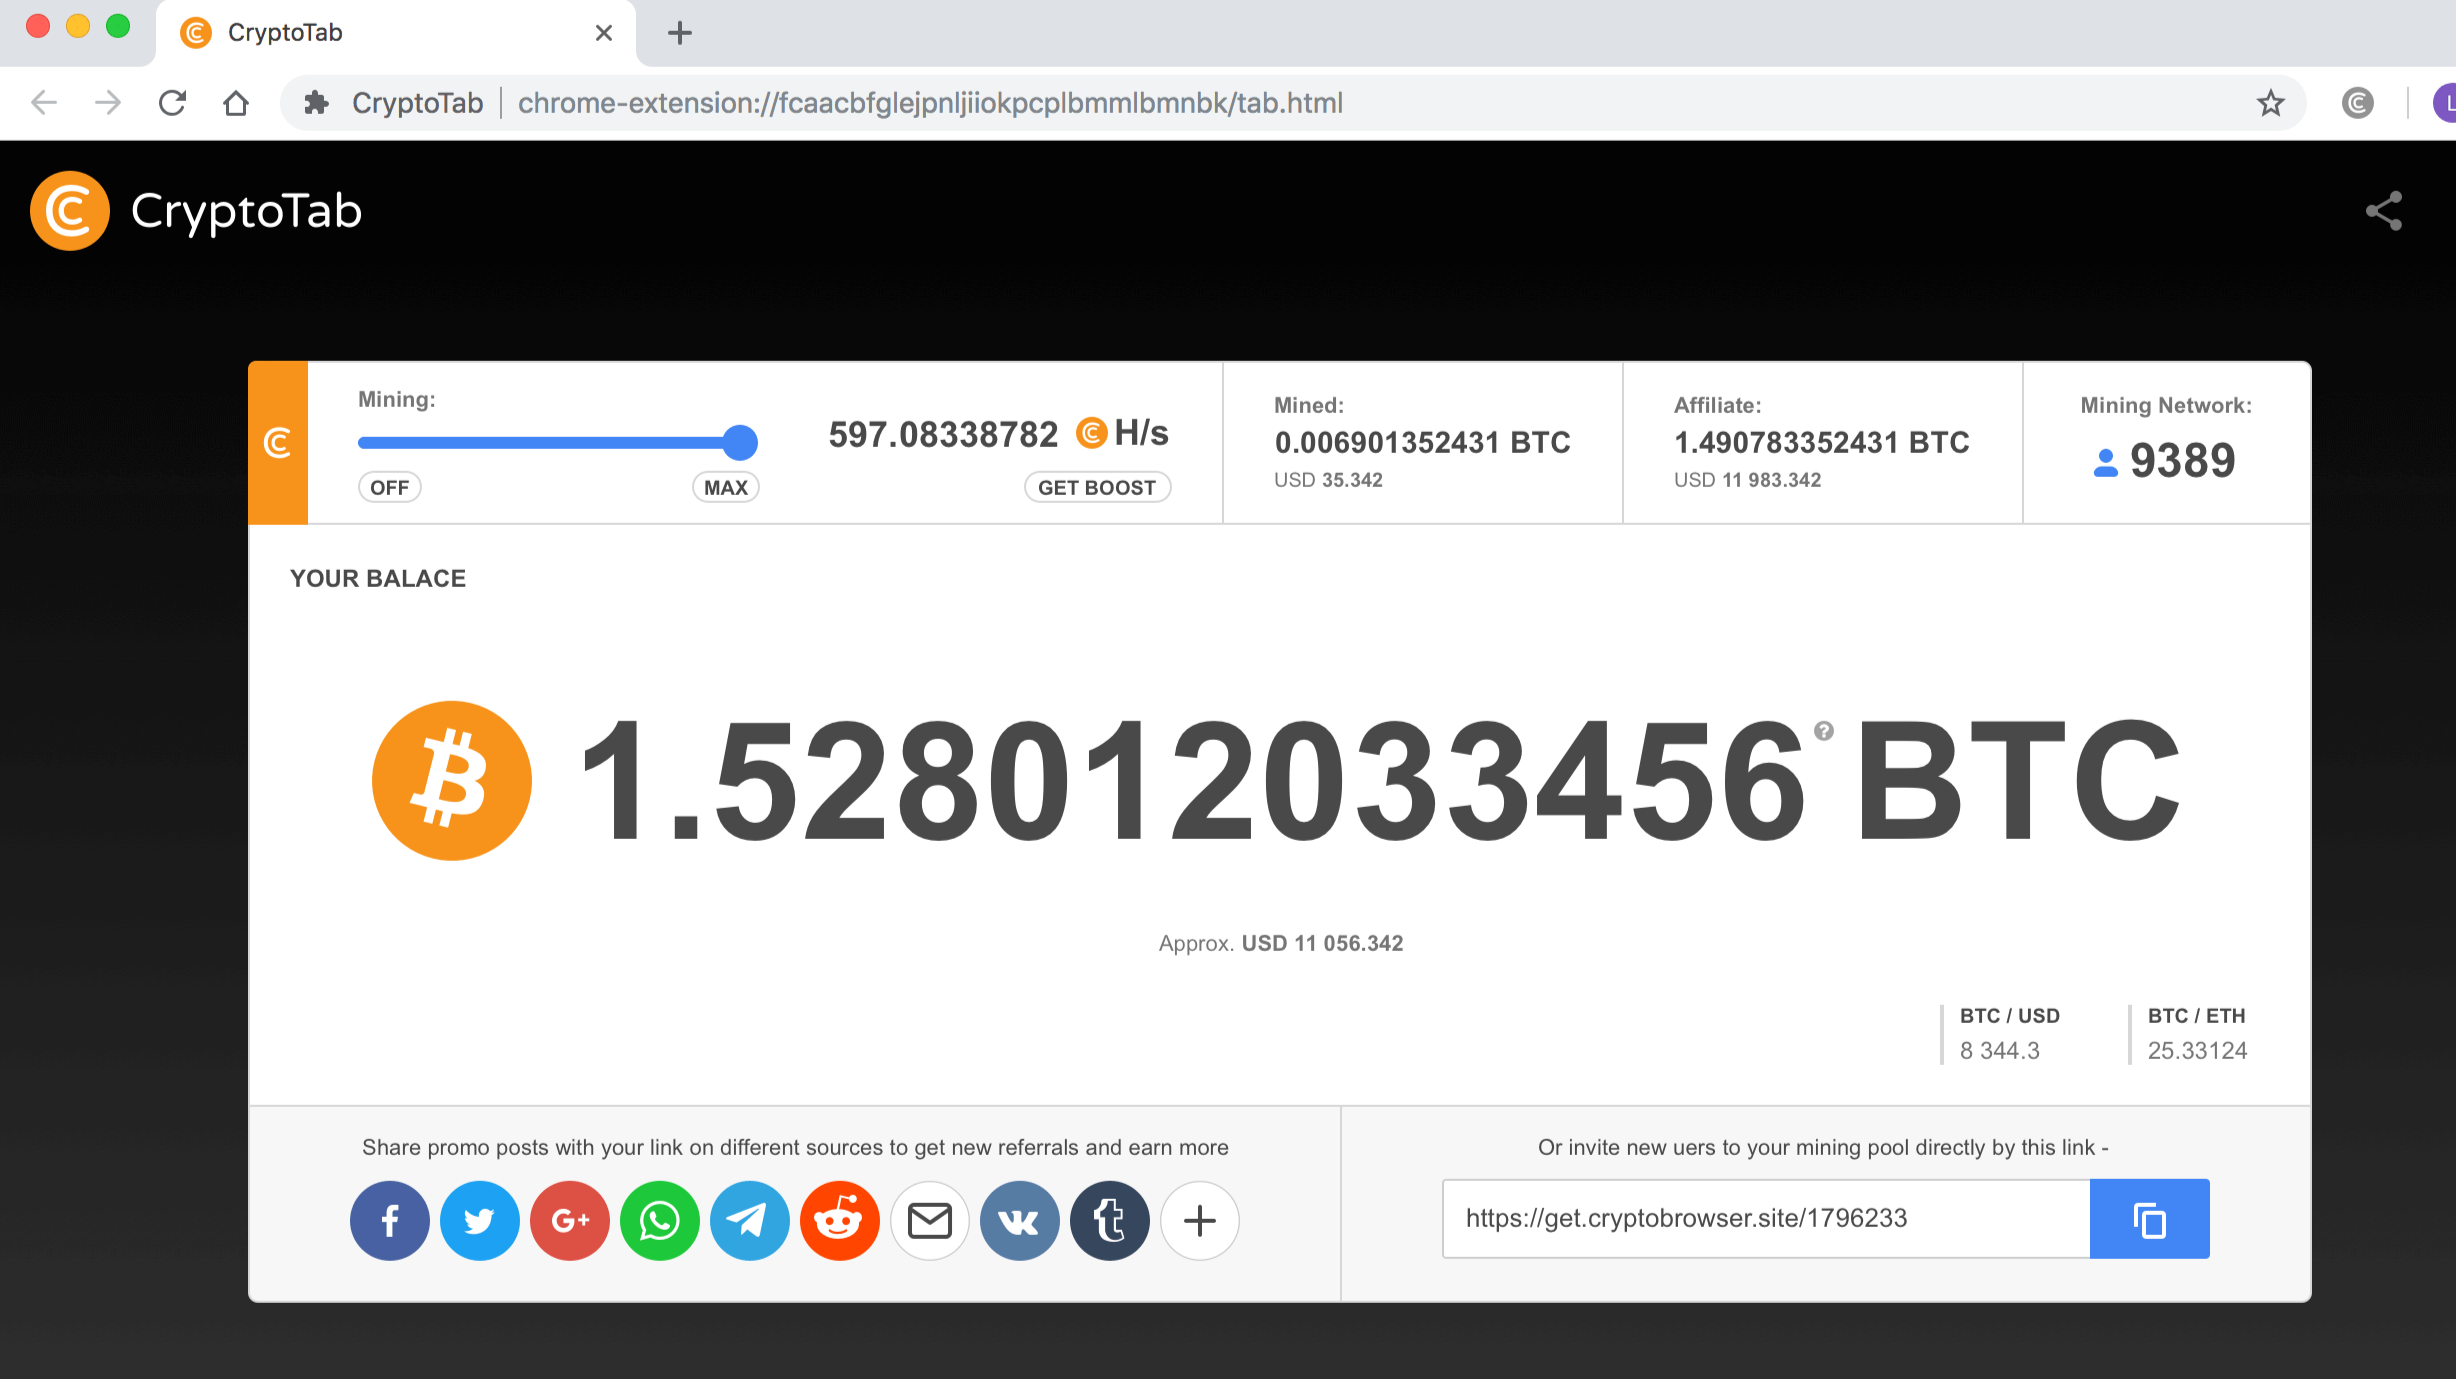 I am not mining cryptocurrency - Google Project has been suspended due to mining crytocurrency